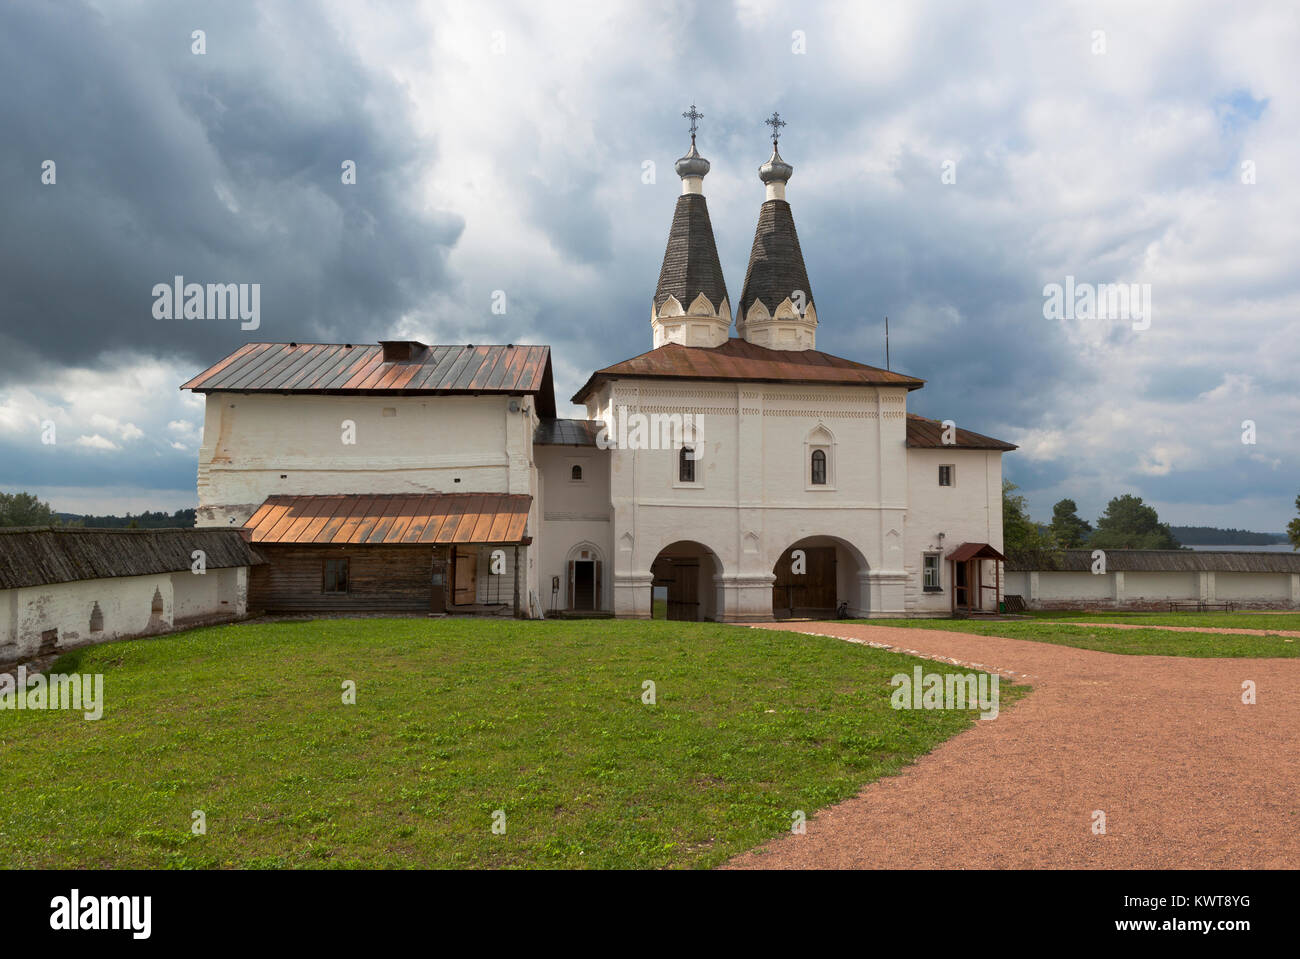 Ferapontovo, Vologda region, Russia - August 9, 2015: Holy Gates Ferapontov Belozersky Monastery of Nativity of the Virgin with the churches of the Ep Stock Photo